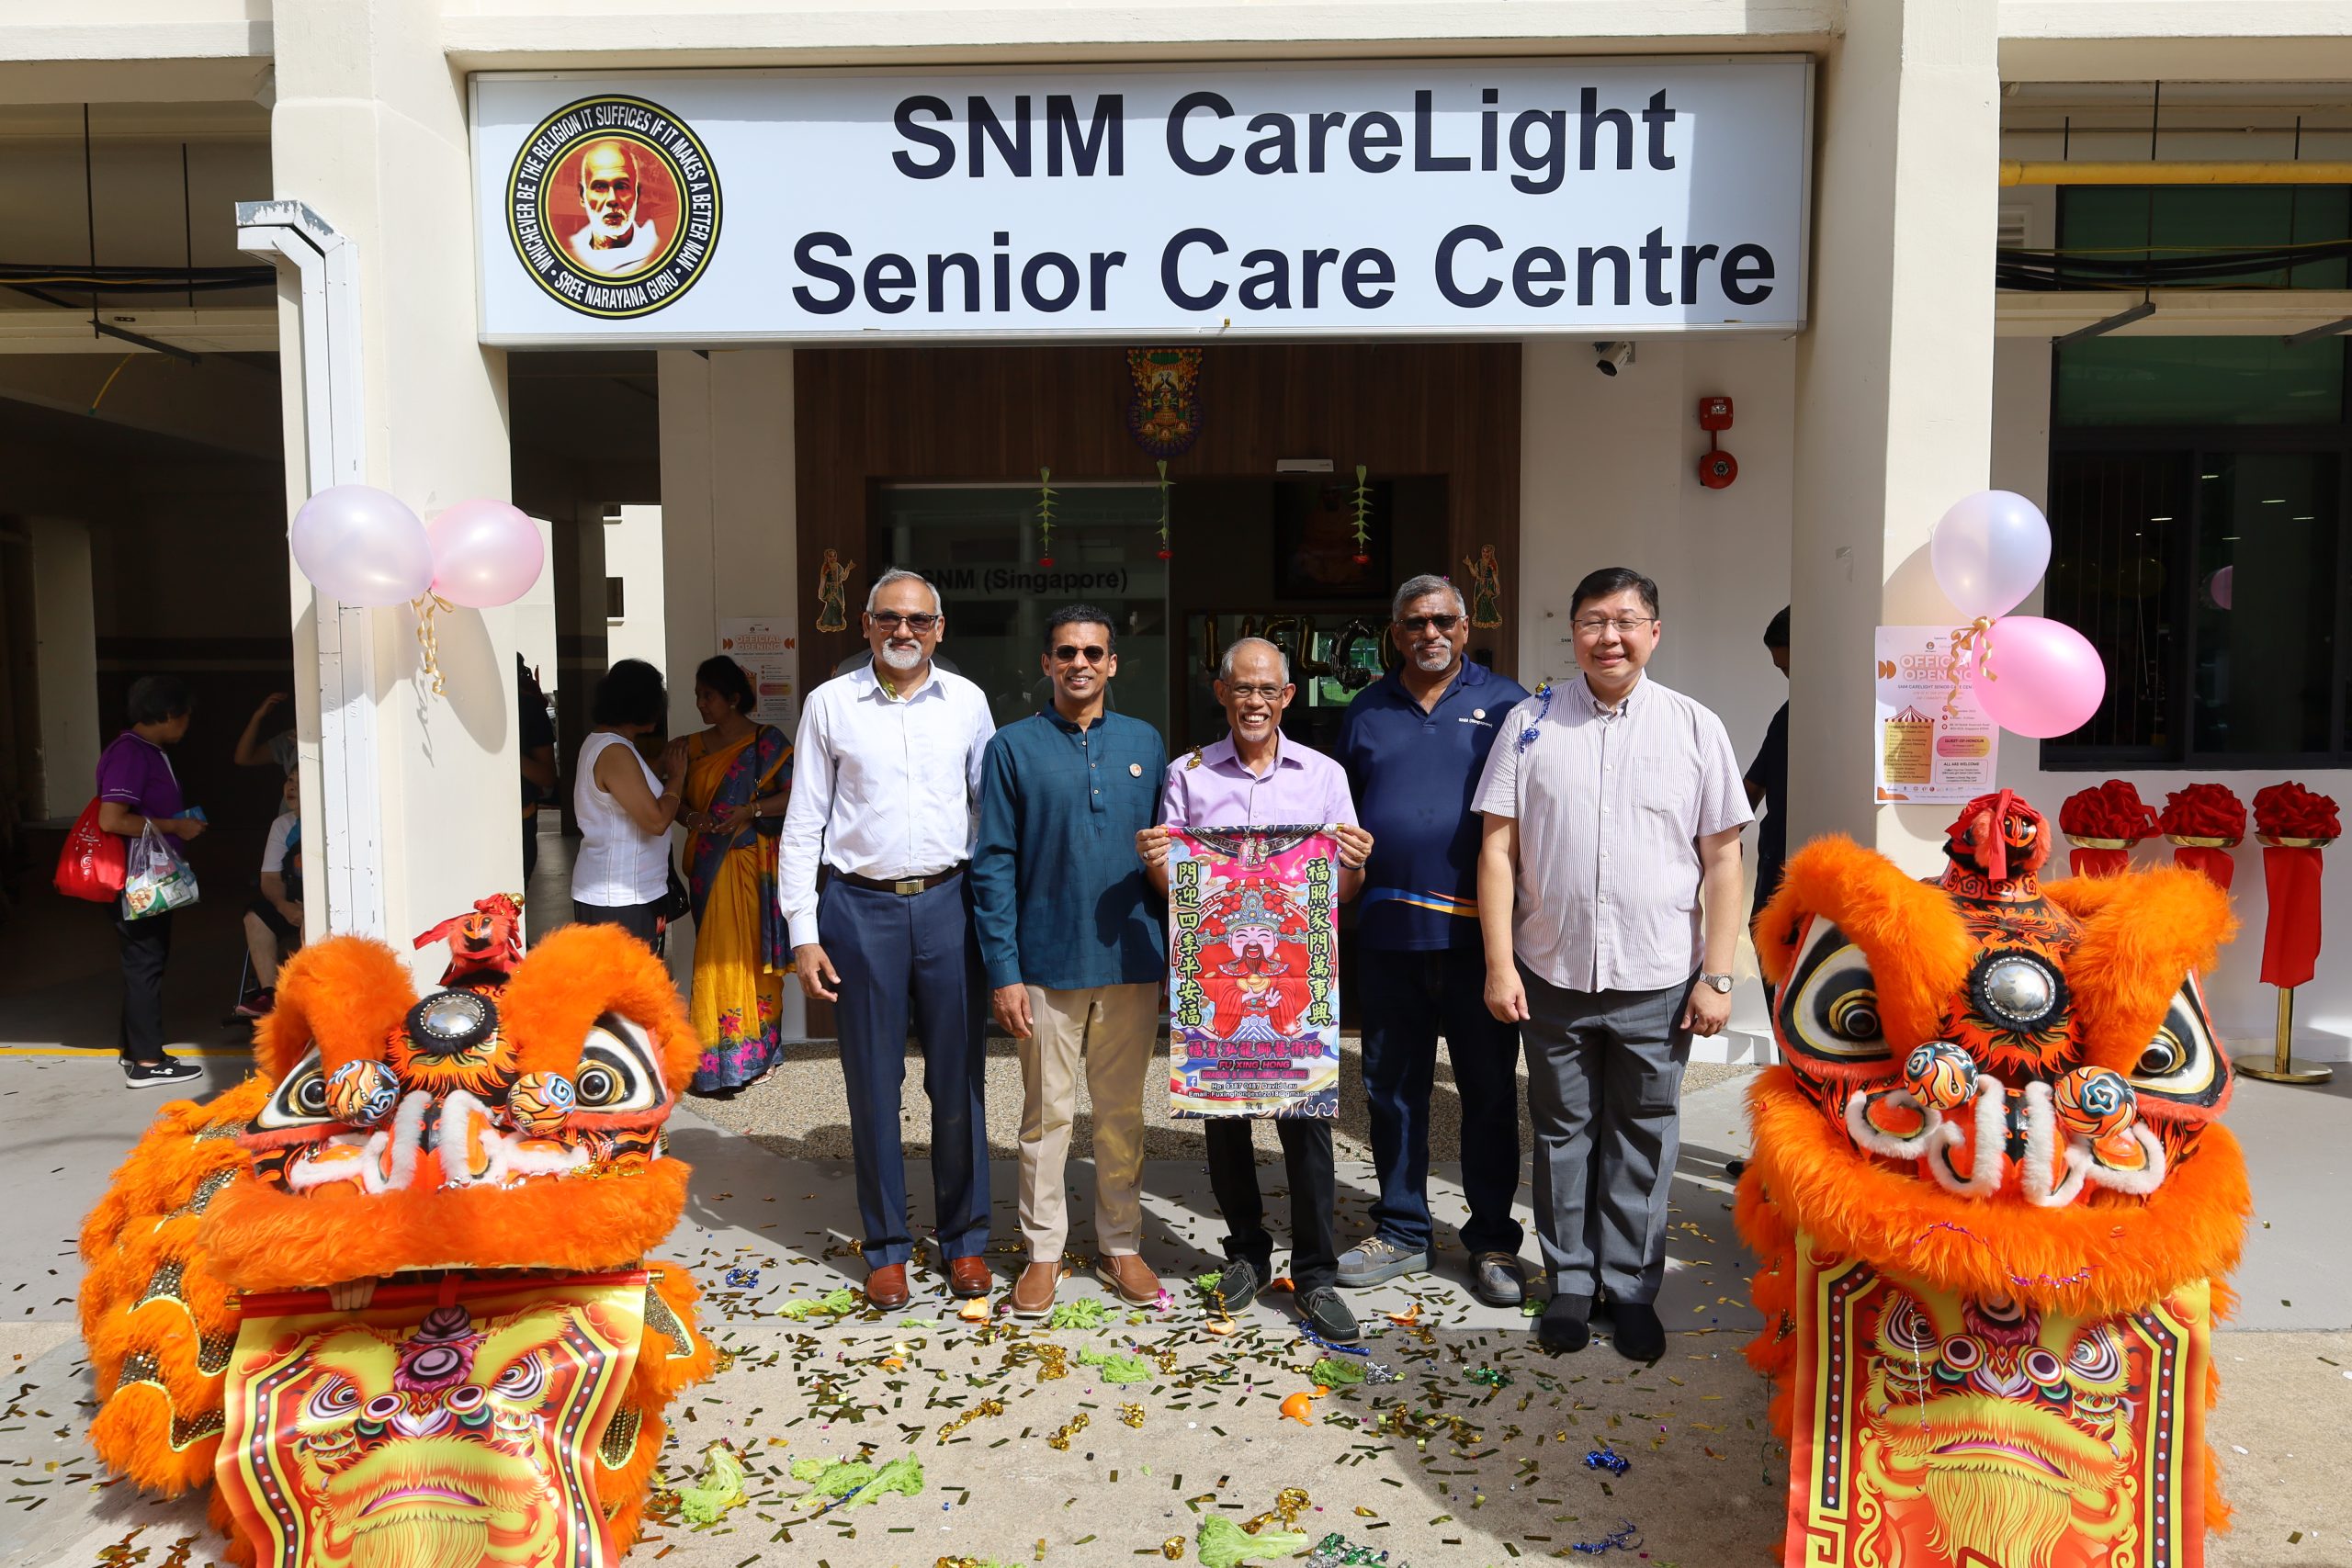 The grand opening of SNM Carelight Senior Care Centre!